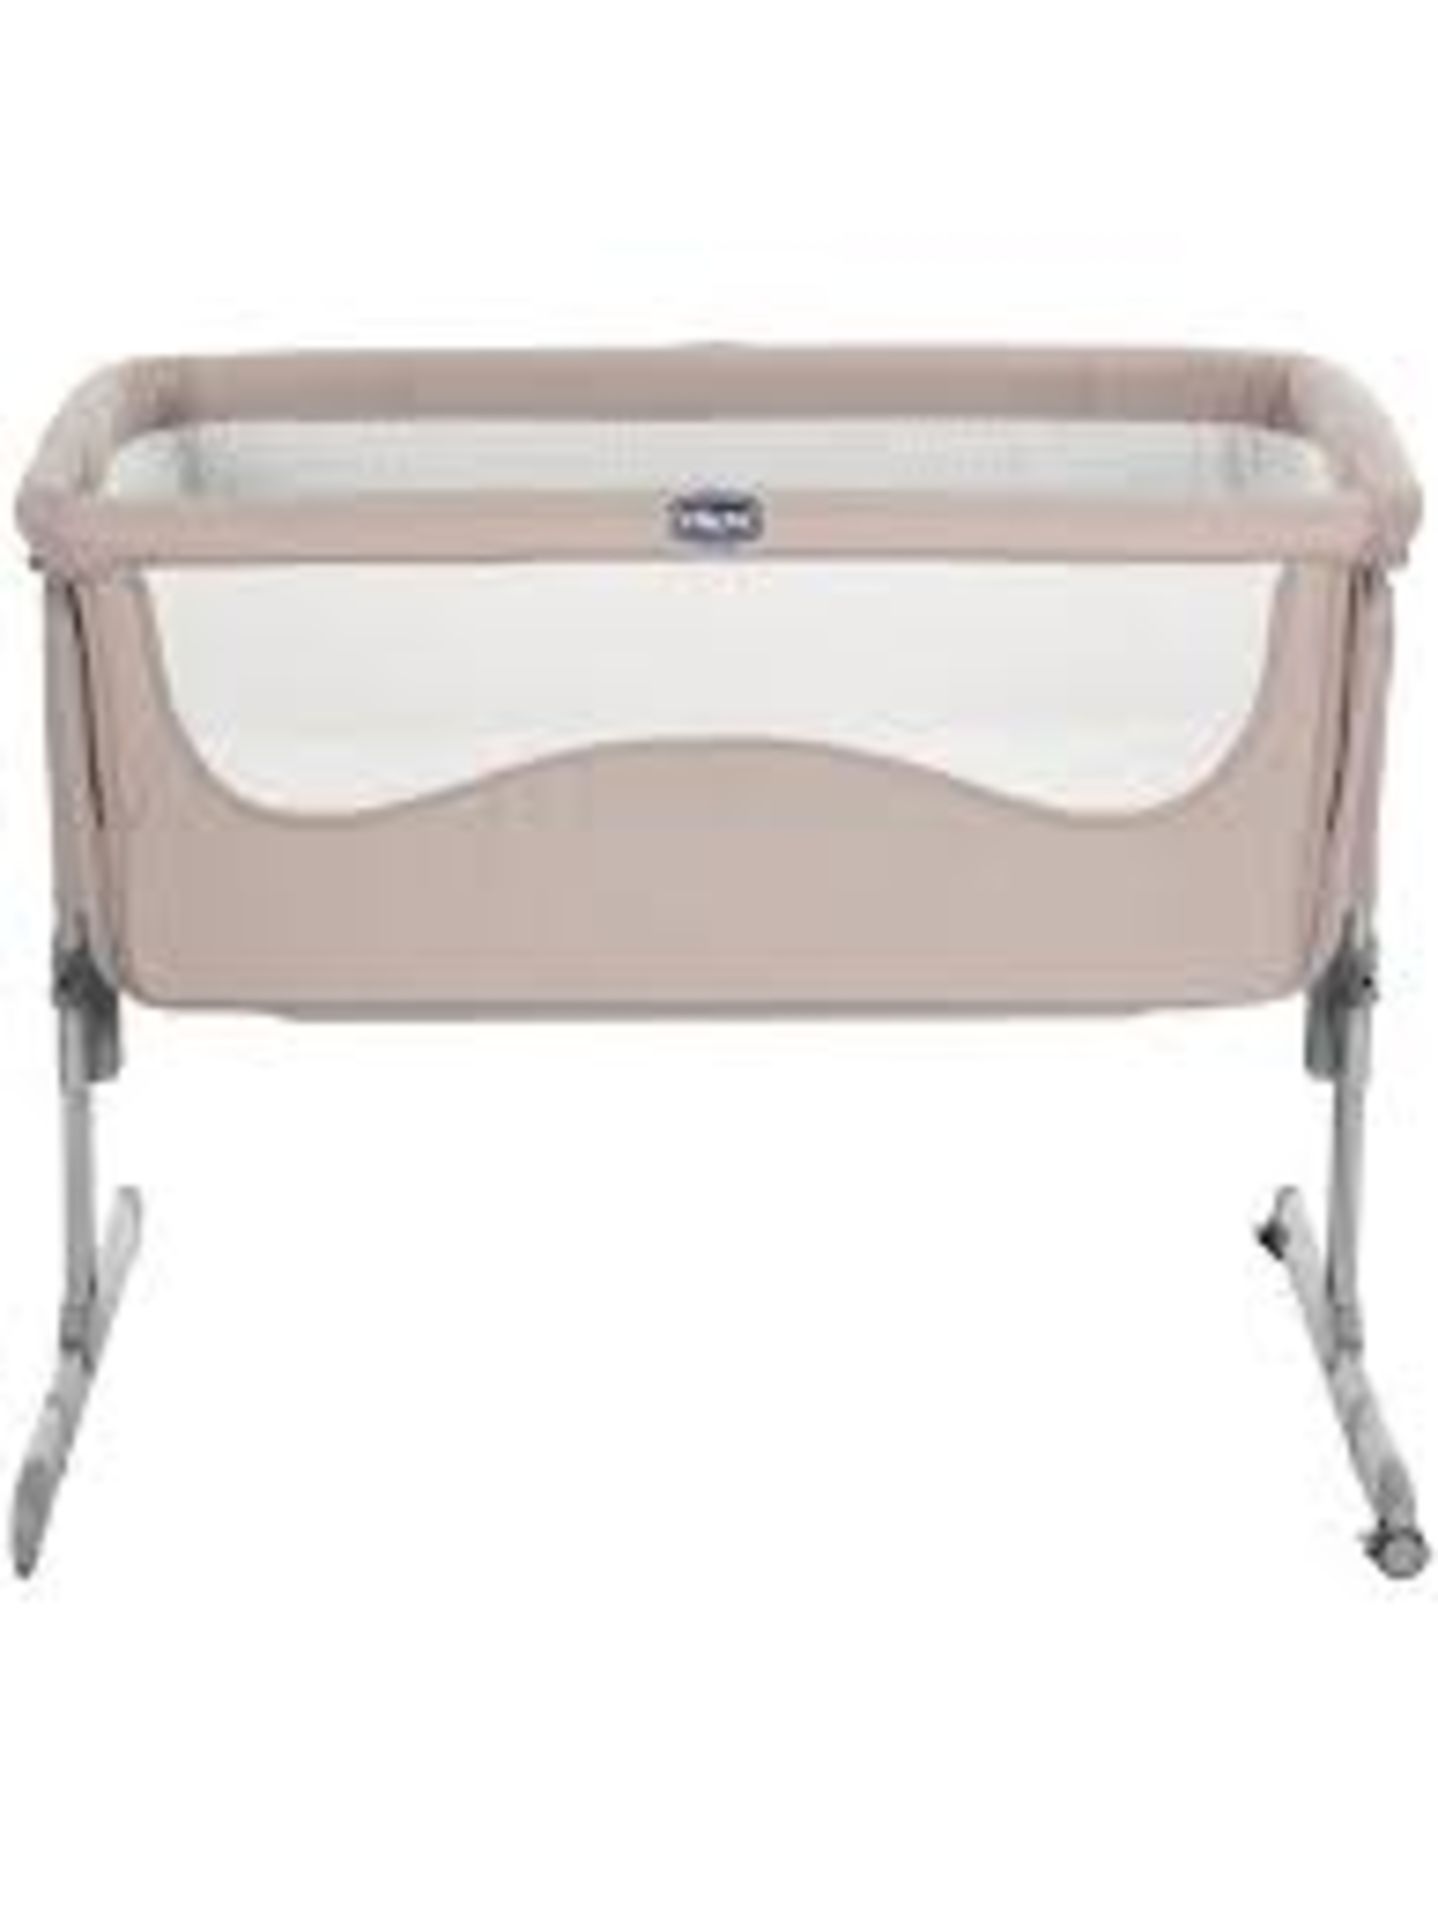 Boxed Chicco Next To Me The Original Bed Side Crib RRP £150 (2993556) (Public Viewing and Appraisals